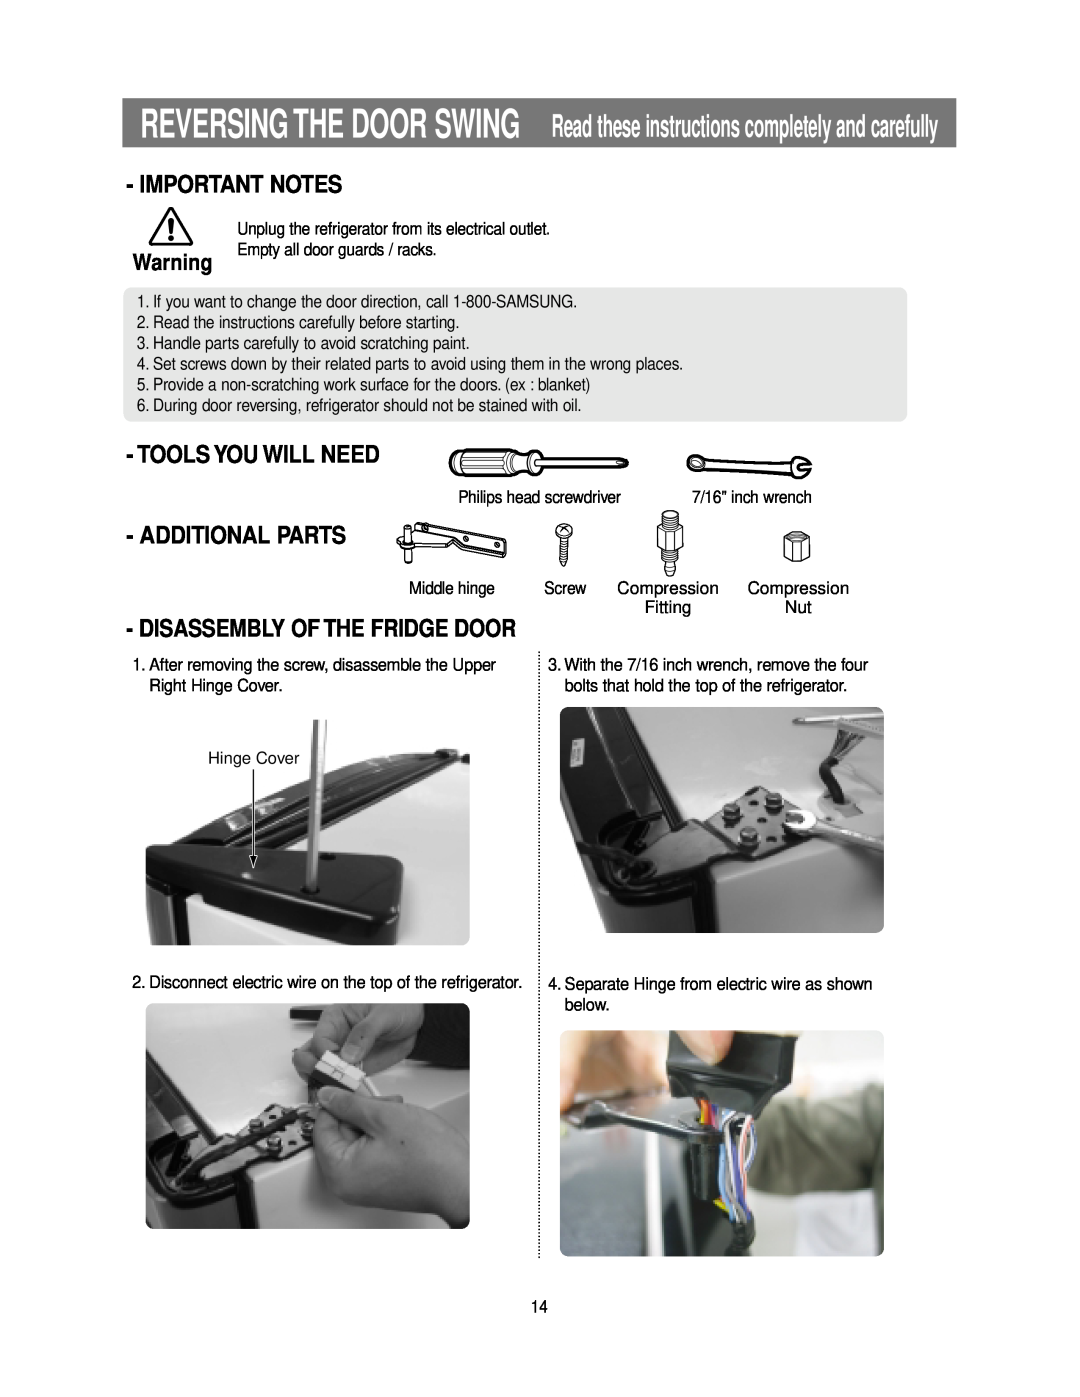 Samsung RB195ZASW, RB215ZASW Important Notes, Tools You Will Need, Additional Parts, Disassembly Of The Fridge Door 